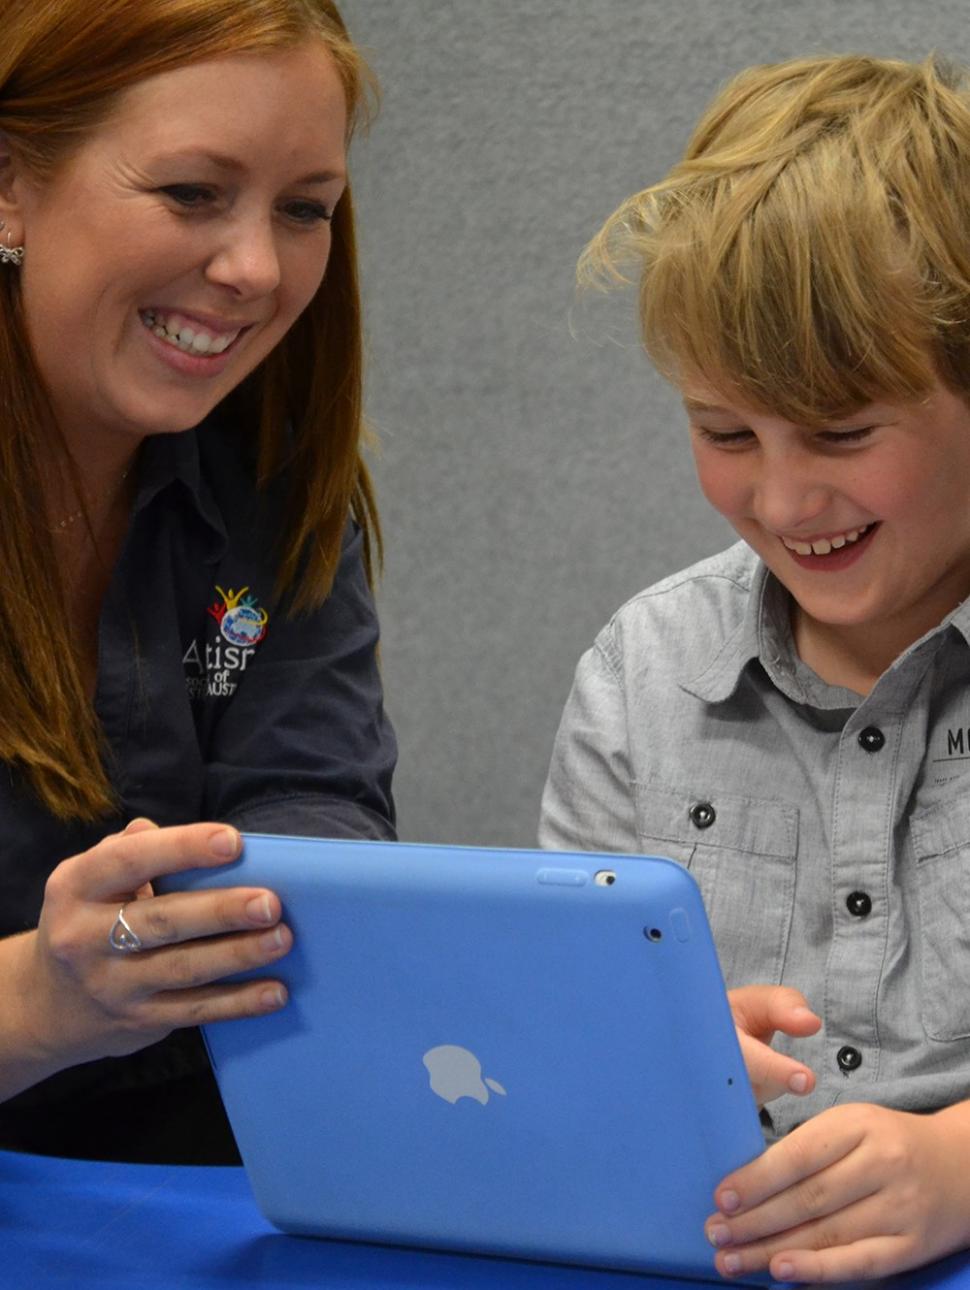 Autism WA staff member engaging with a child with an iPad